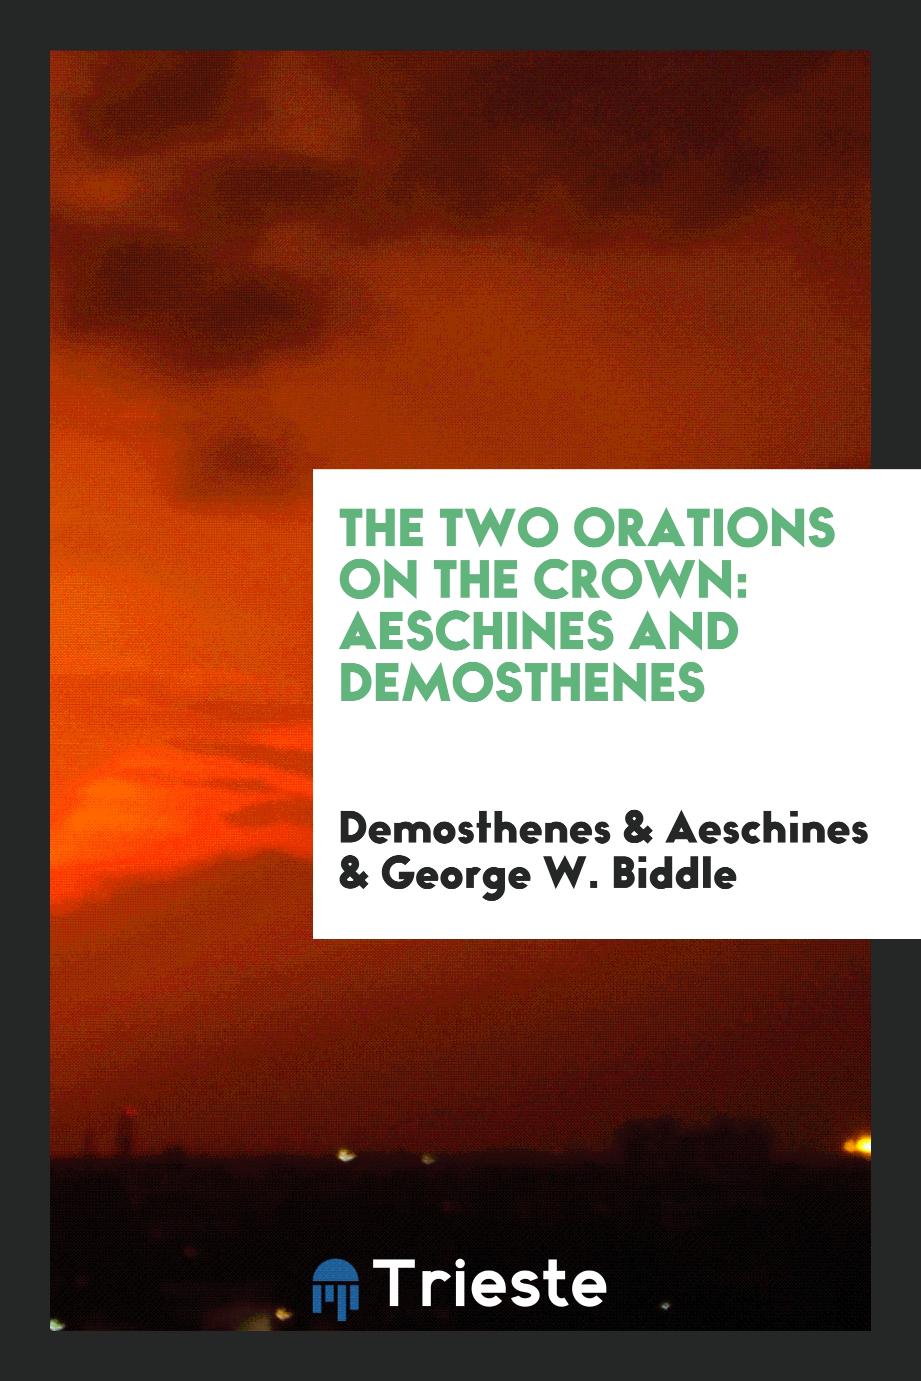 The Two Orations on the Crown: Aeschines and Demosthenes